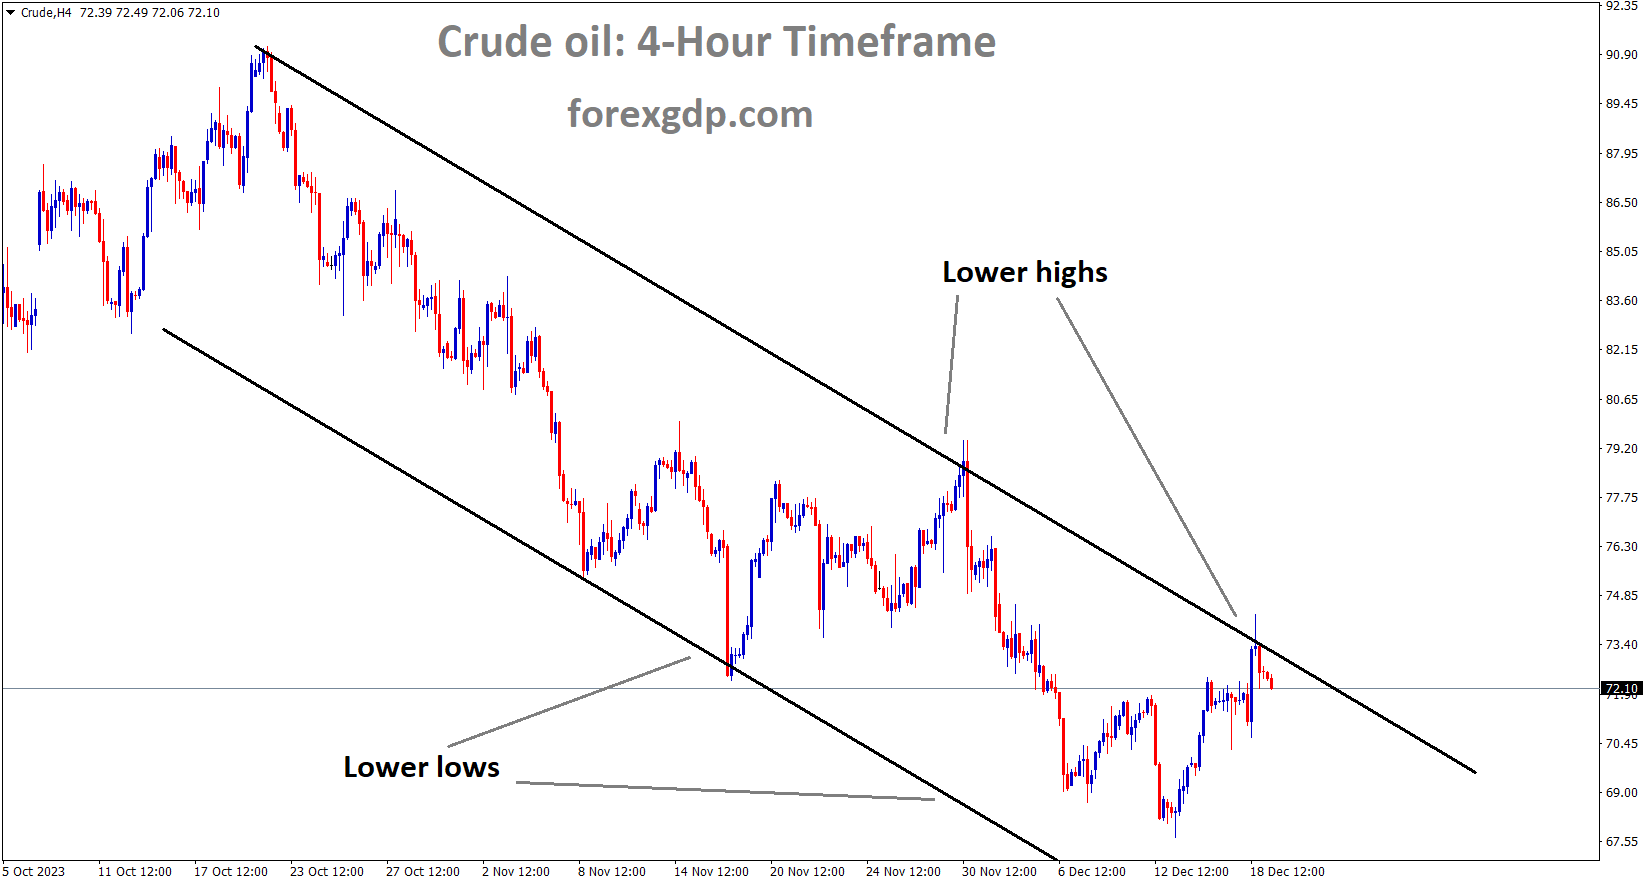 Crude oil is moving in the Descending channel and the market has fallen from the lower high area of the channel